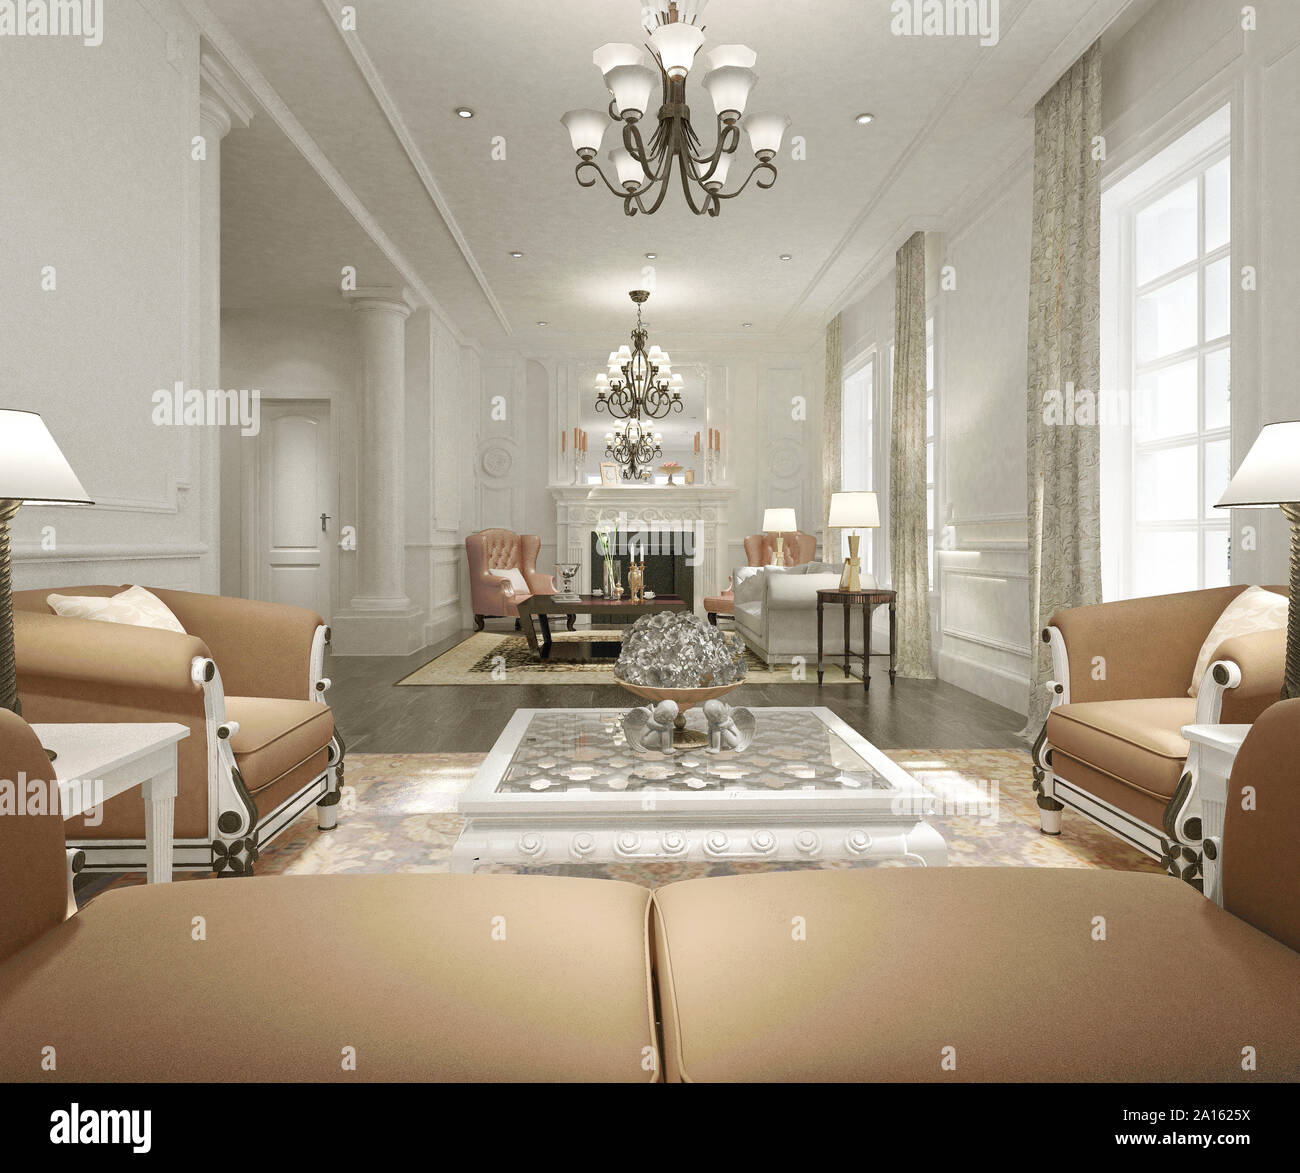 3d render of home interior Stock Photo